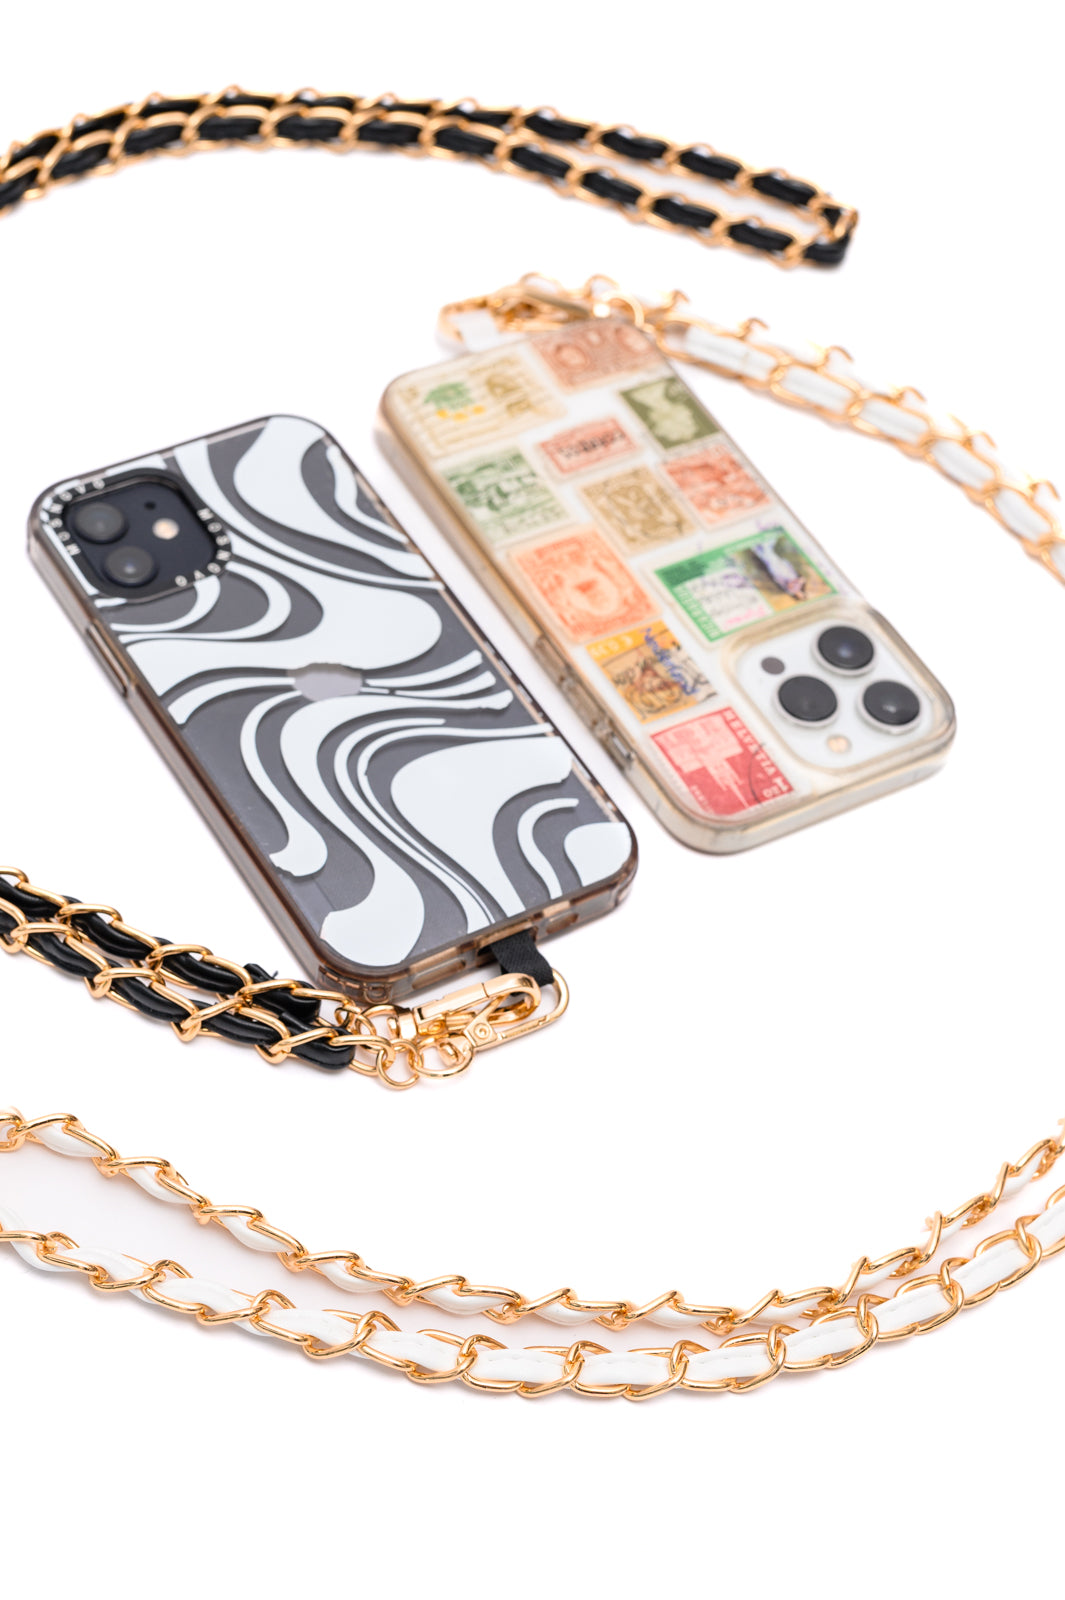 PU Leather Gold Chain Cell Phone Lanyard Set of 2-Accessories-Ave Shops-Market Street Nest, Fashionable Clothing, Shoes and Home Décor Located in Mabank, TX